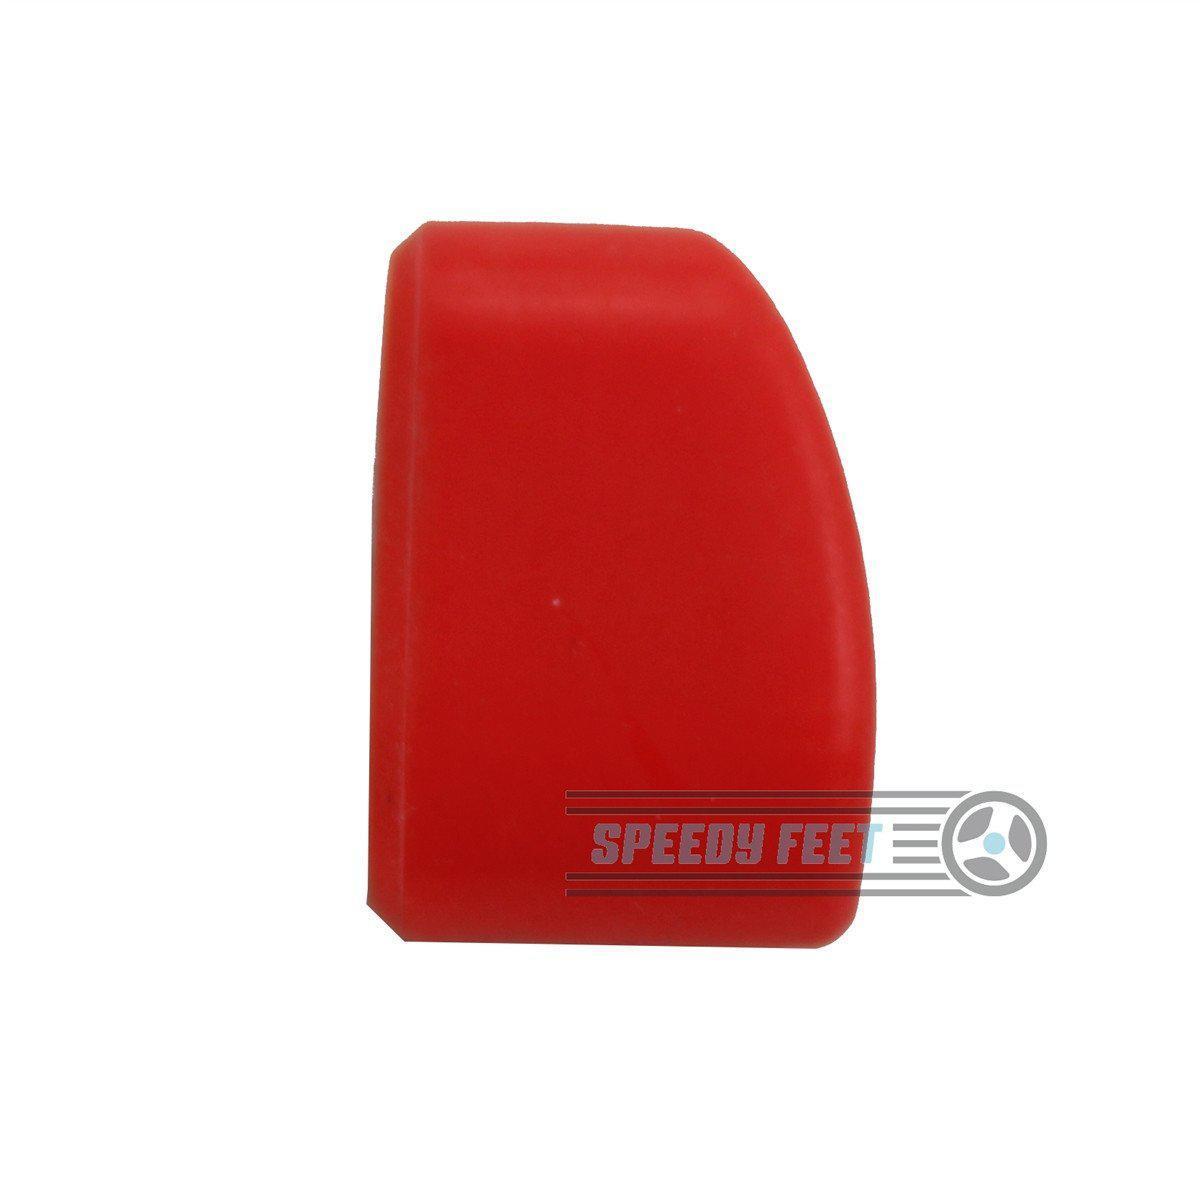 Knee control steering cover (silicon)